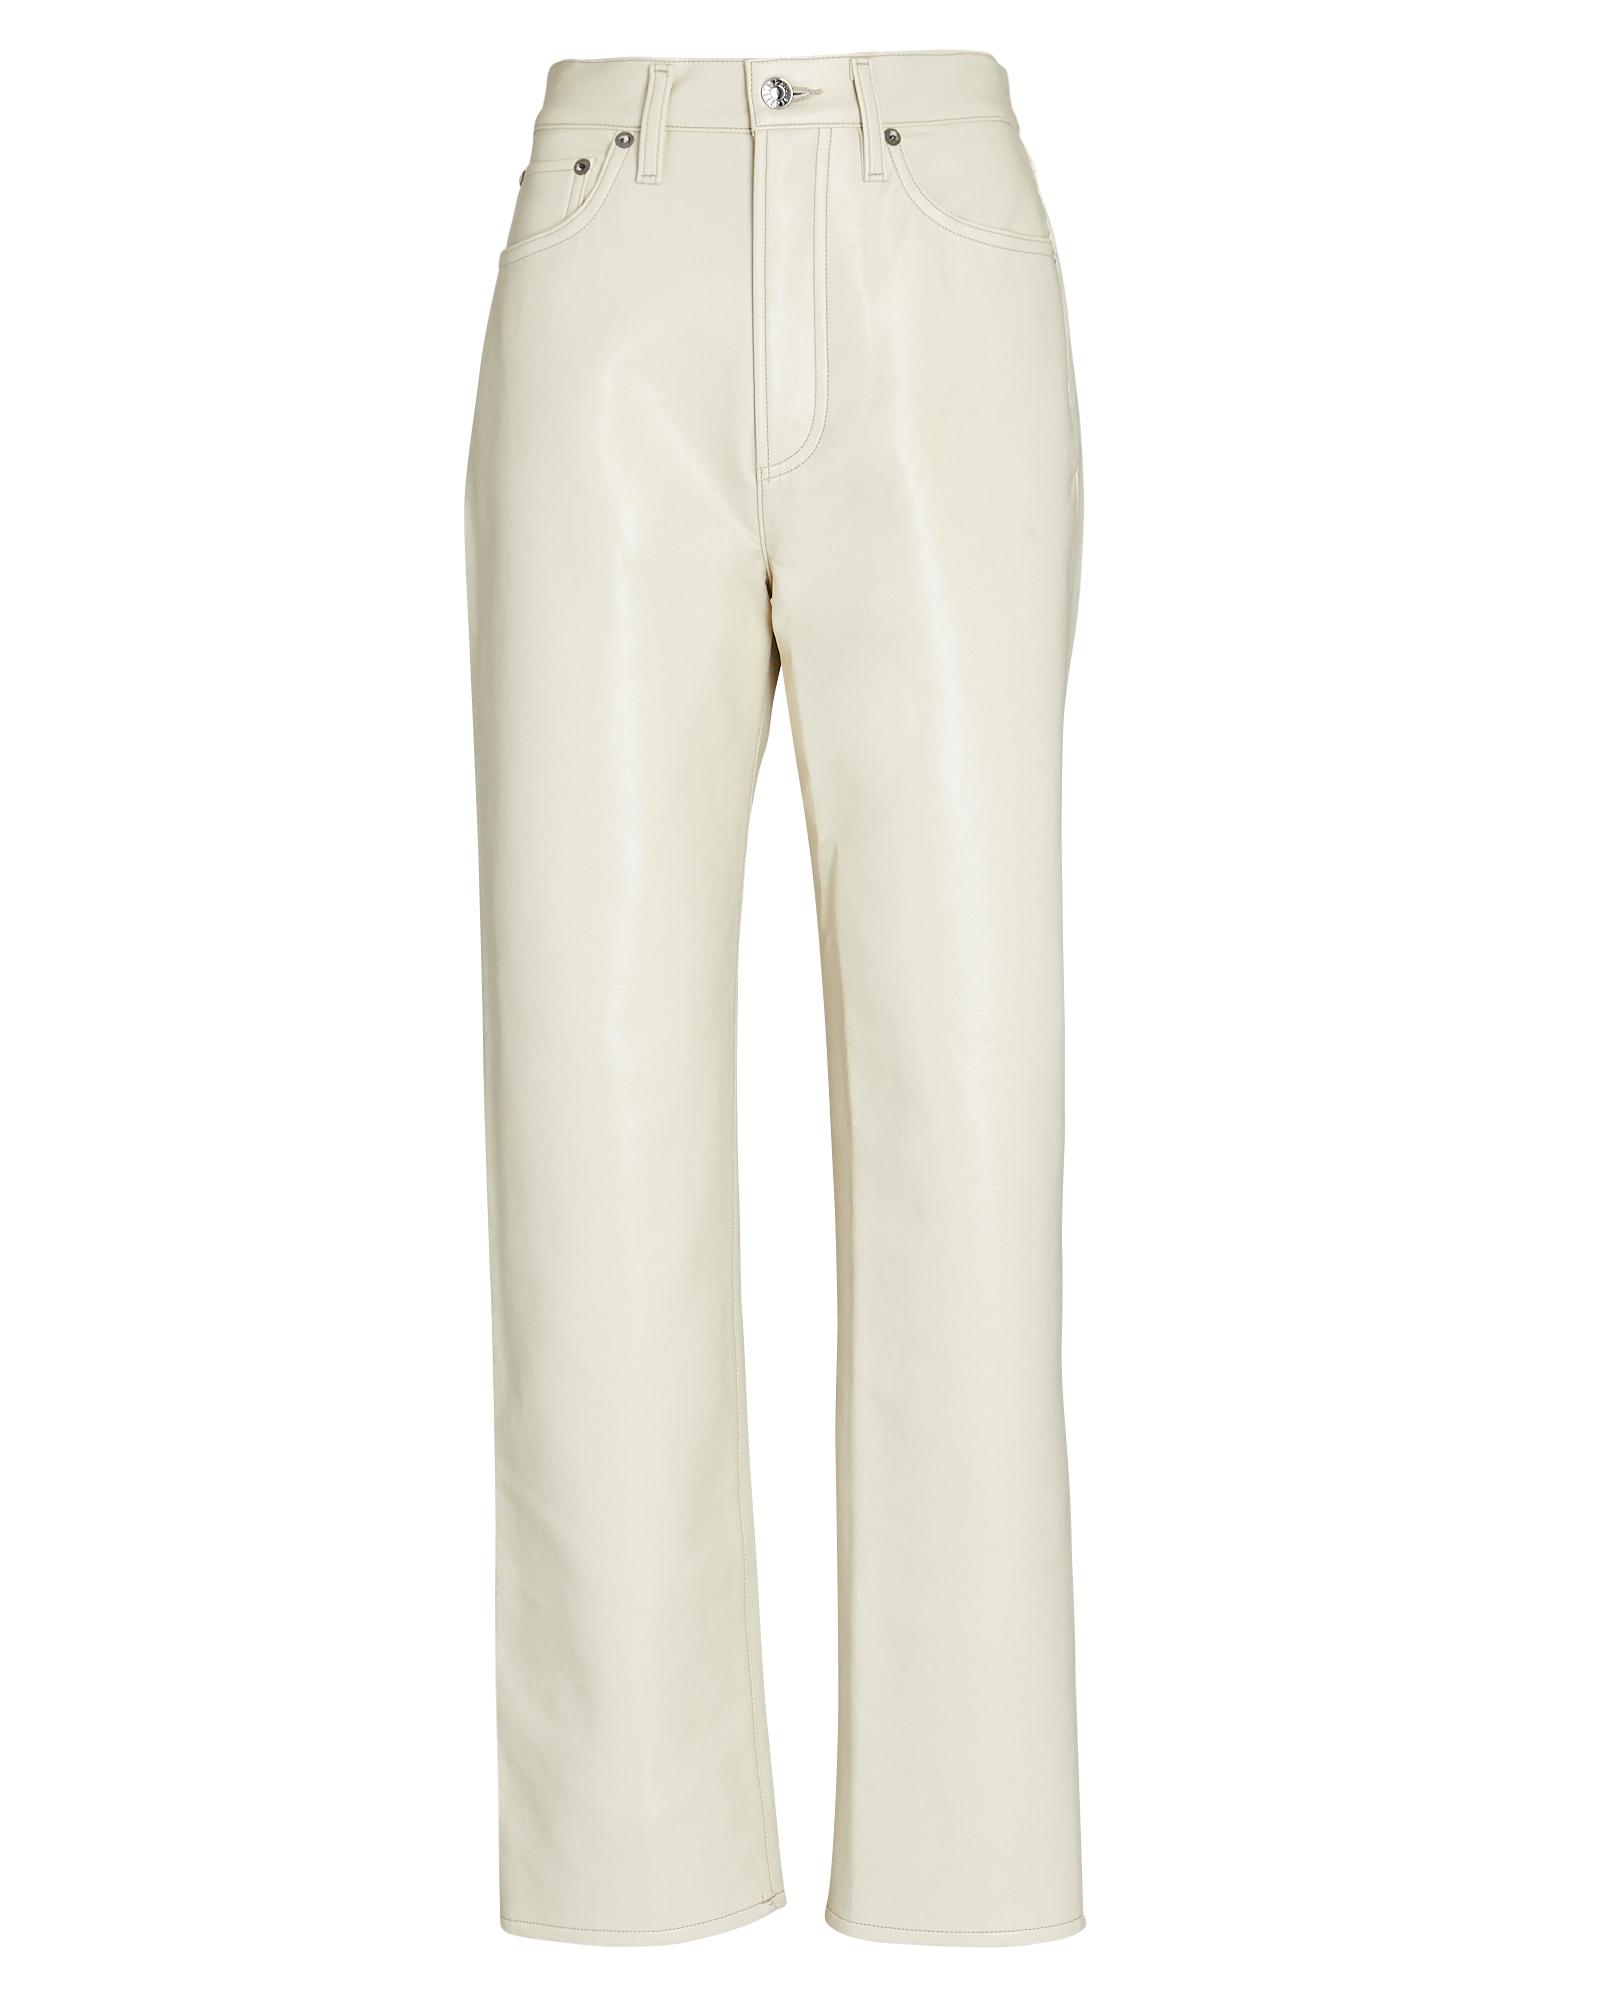 90s Pinch high-rise leather pants in beige - Agolde